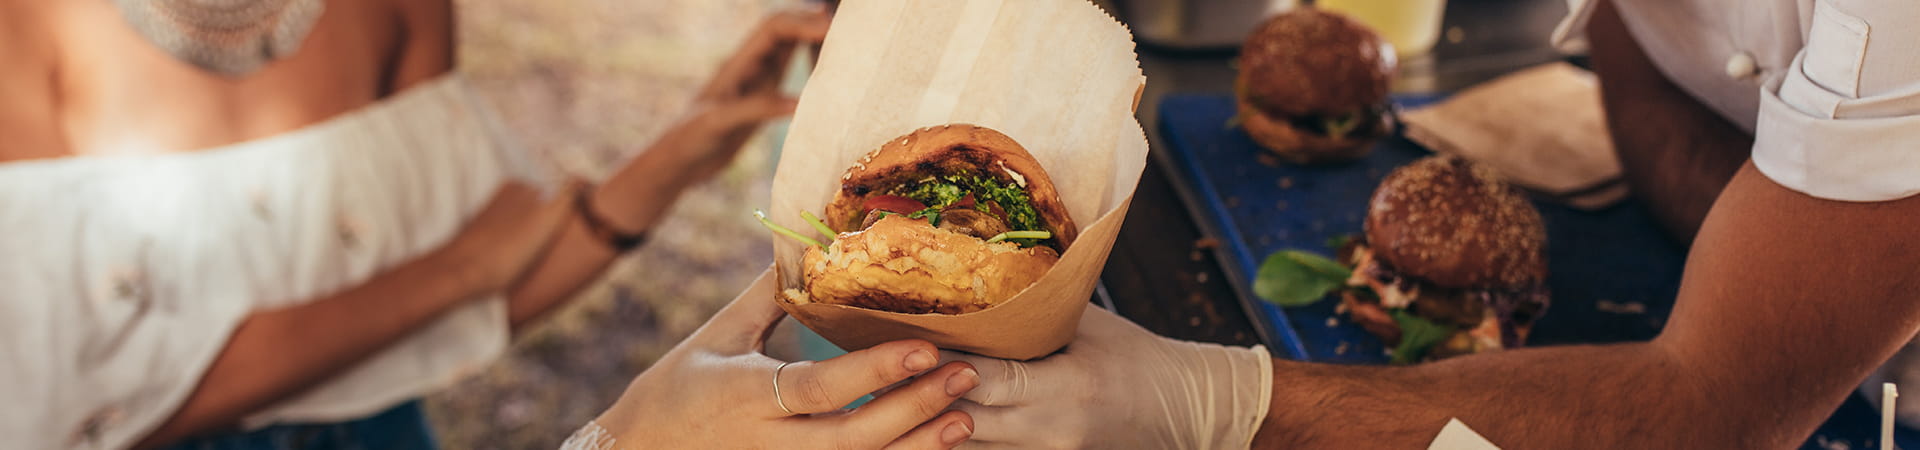 Woman being given a plant-based burger from a man serving at a food truck